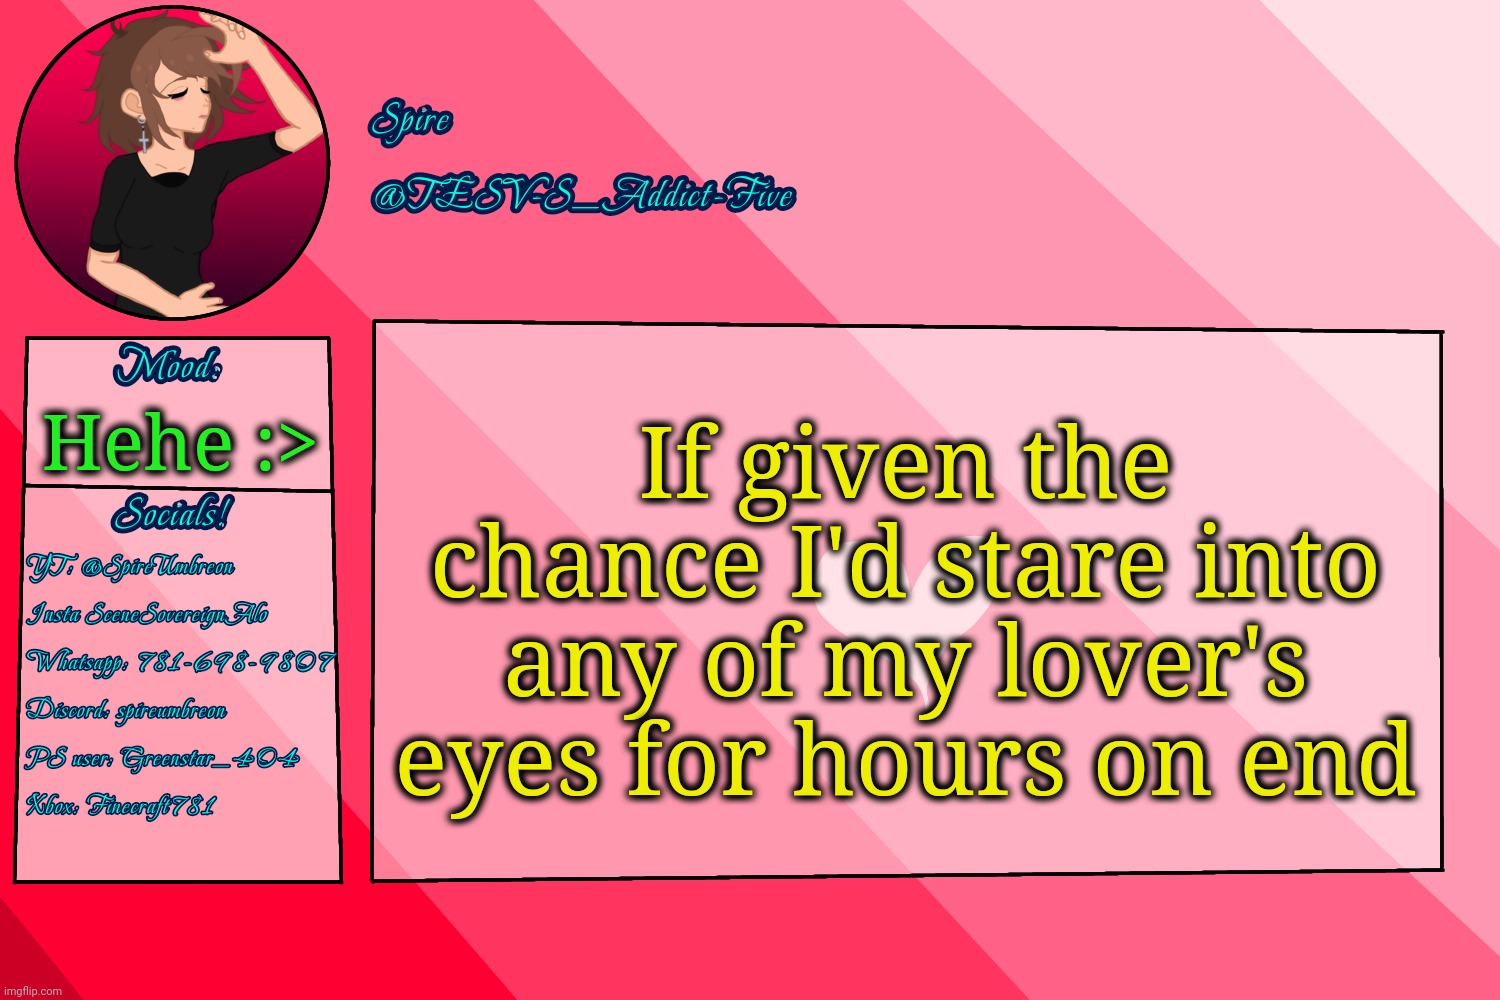 . | If given the chance I'd stare into any of my lover's eyes for hours on end; Hehe :> | image tagged in tesv-s_addict-five announcement template | made w/ Imgflip meme maker